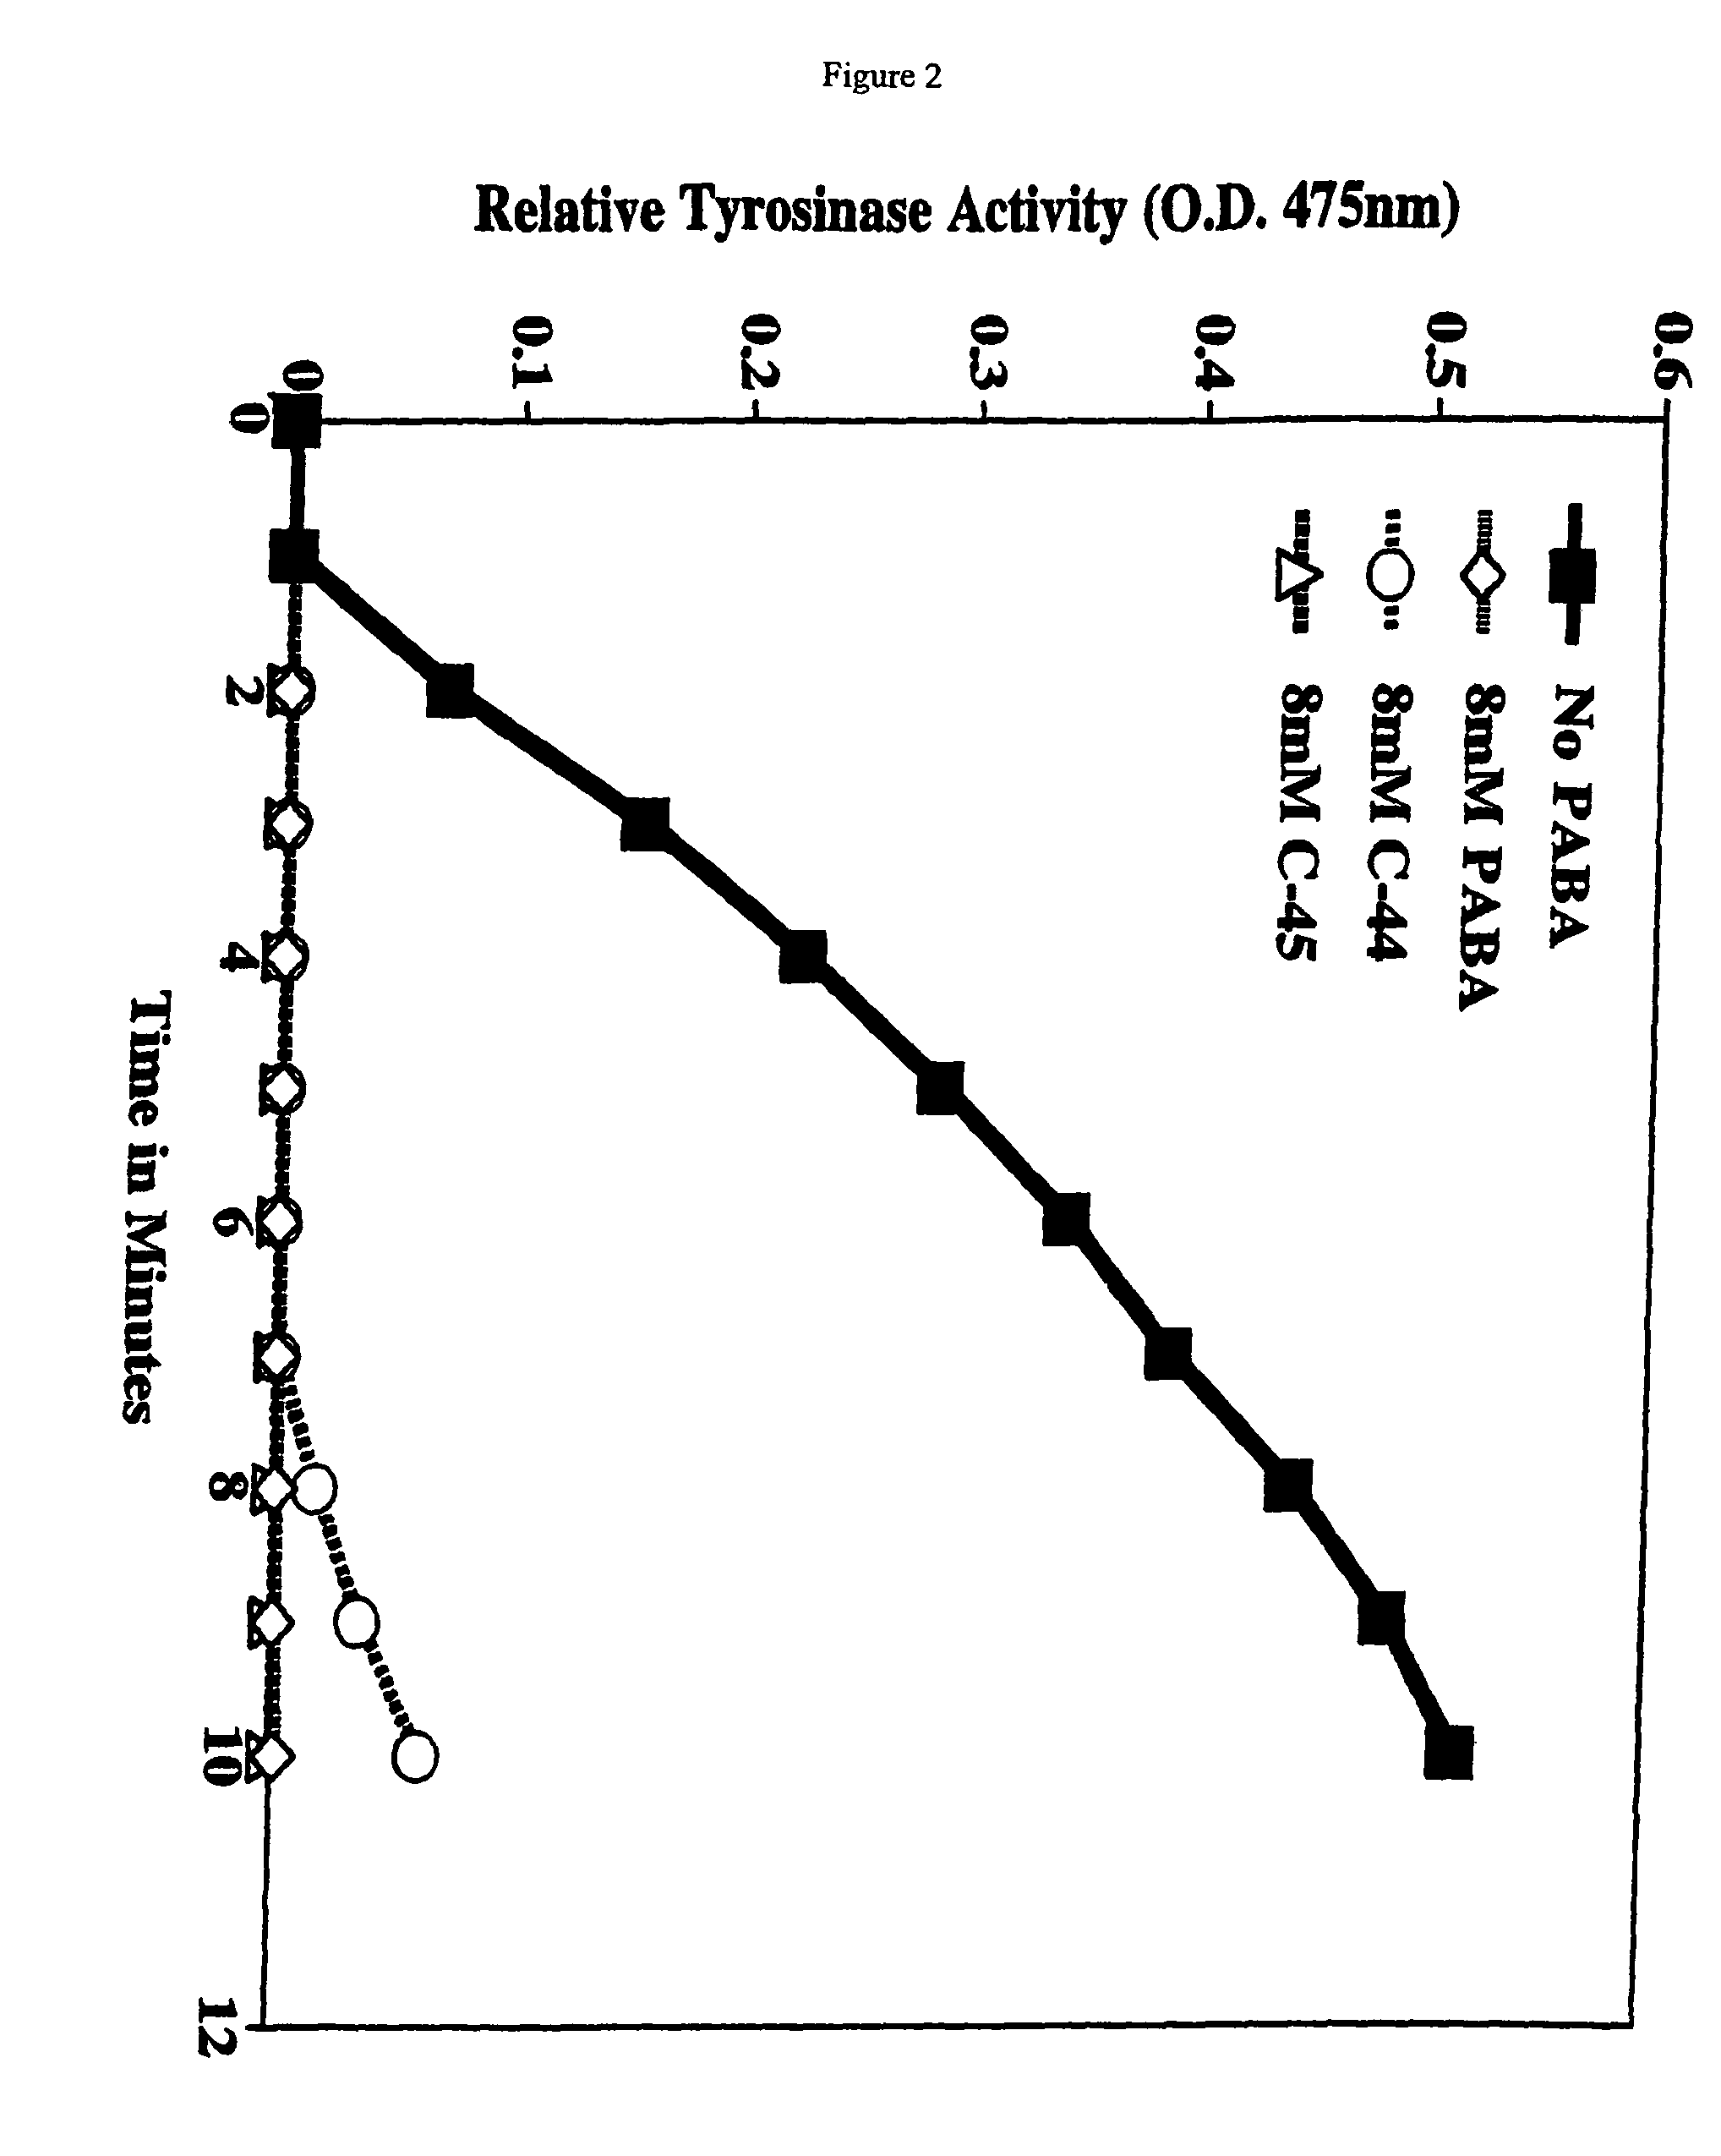 Treatment of cancer using benzoic acid derivatives